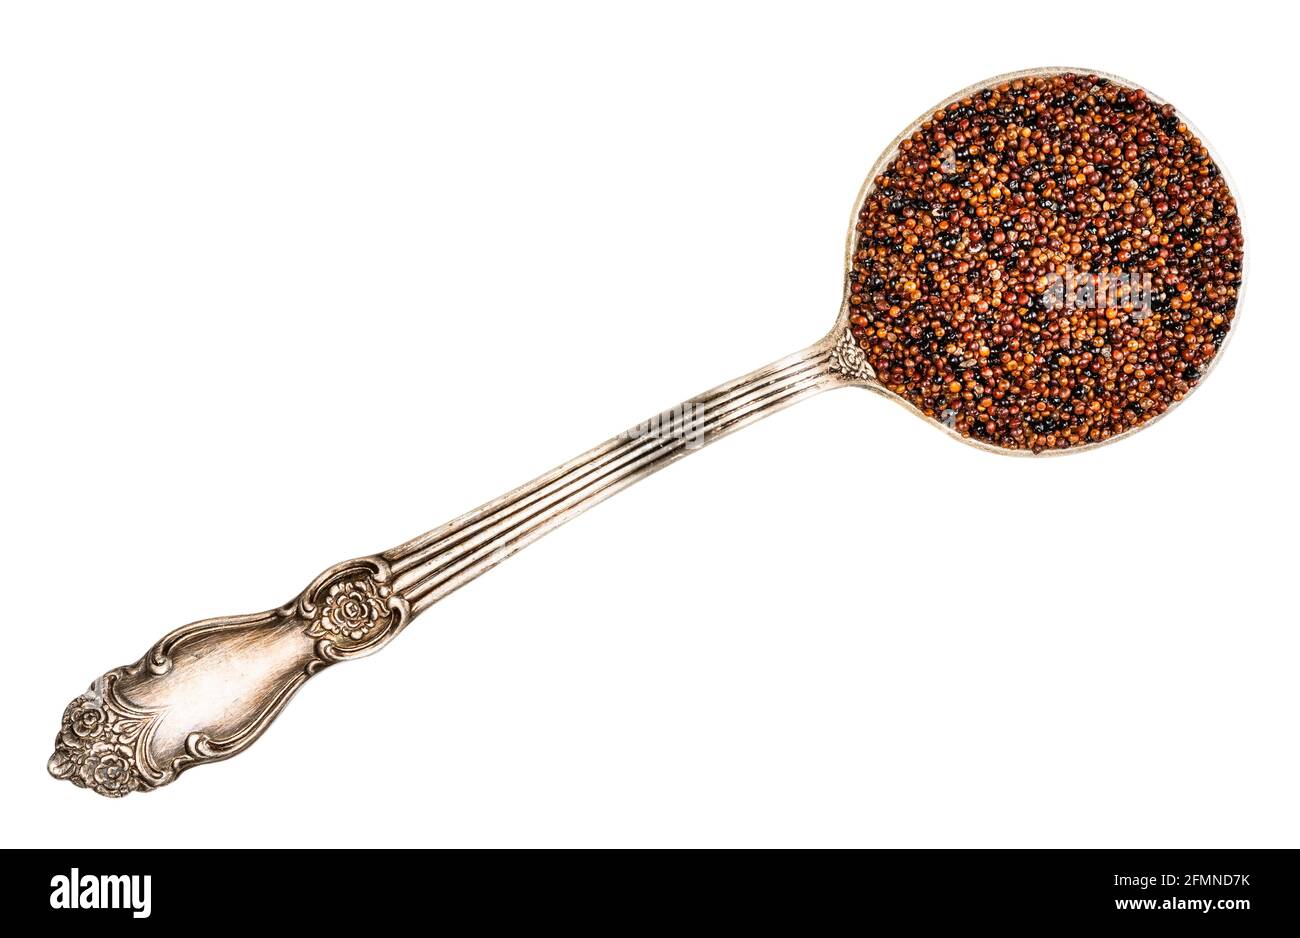 top view of canihua seeds in tablespoon cutout on white background Stock Photo